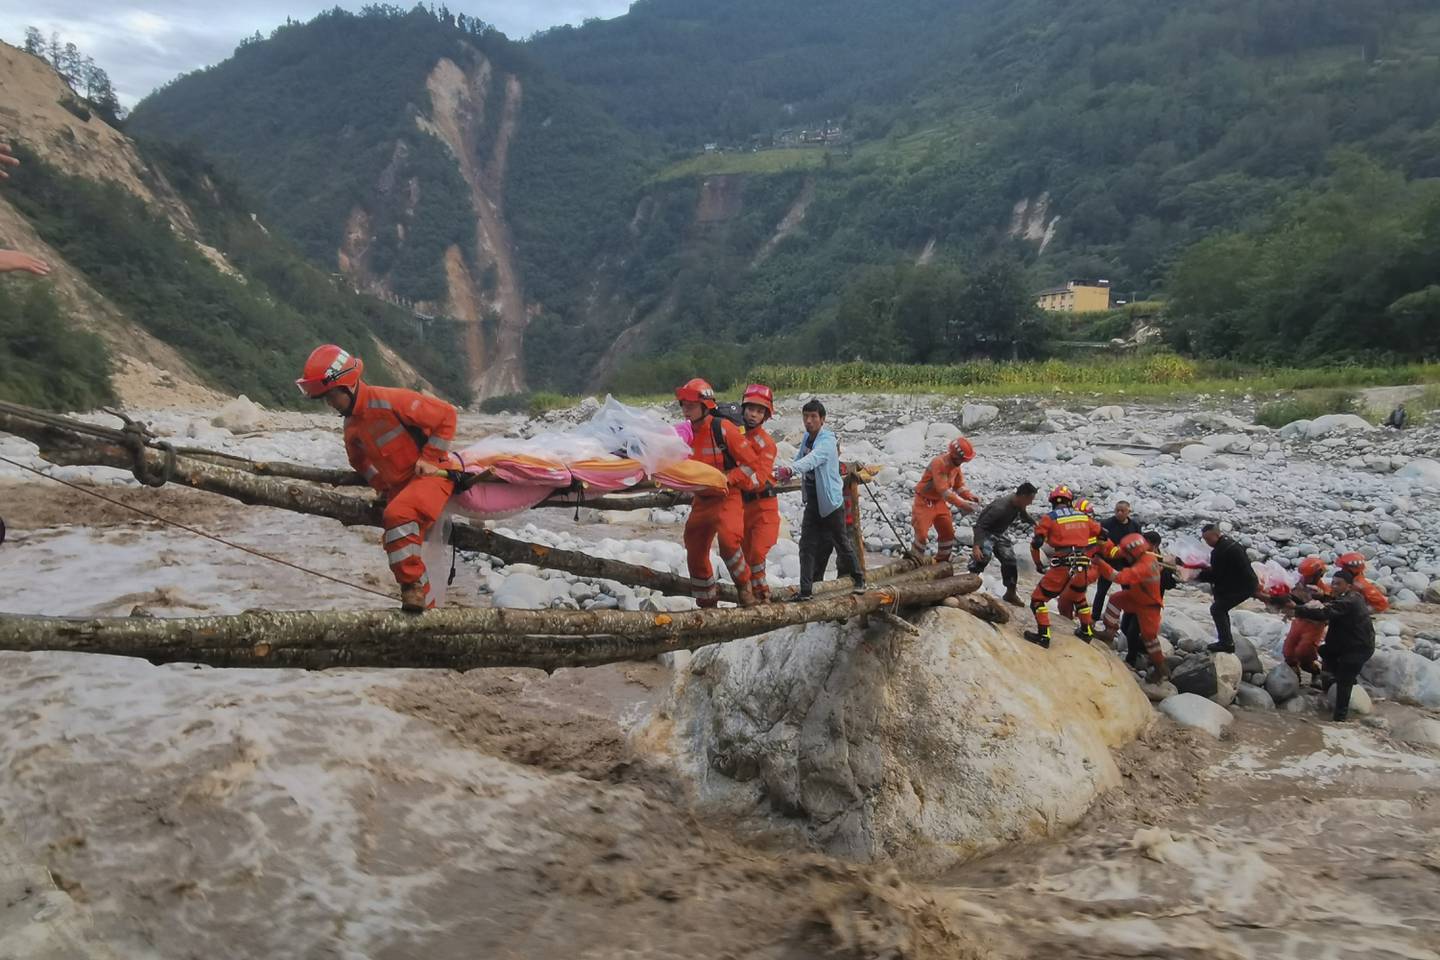 Rescuers carry survivors across a river on the outskirts of Moxi, a town in China's Sichuan province, after an earthquake hit on Monday. AP